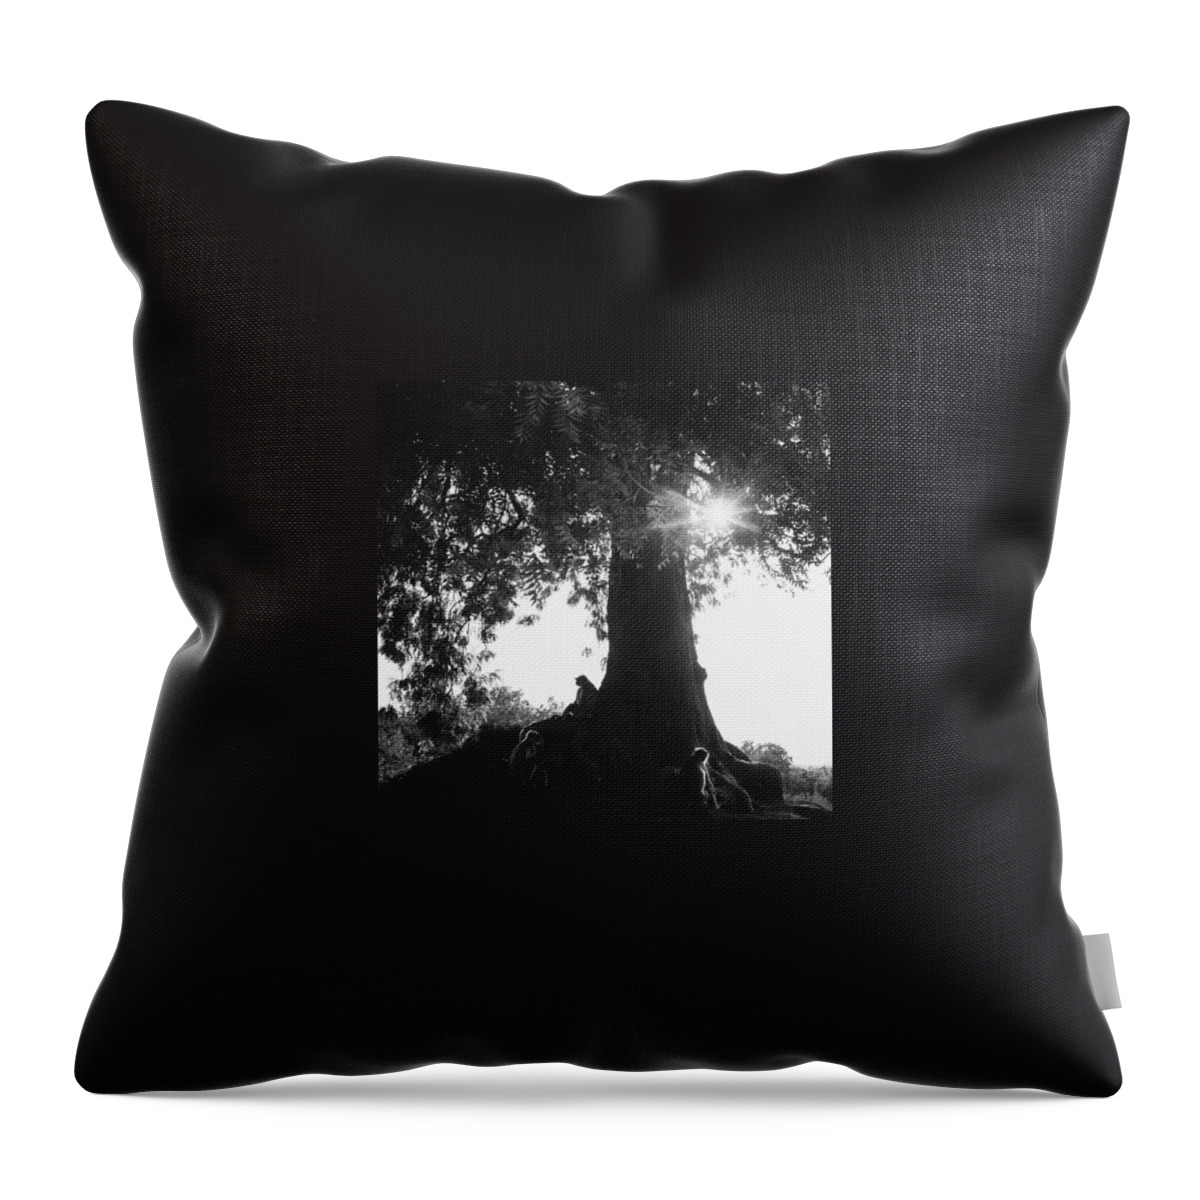  Throw Pillow featuring the photograph The Monkey Tree by Aleck Cartwright